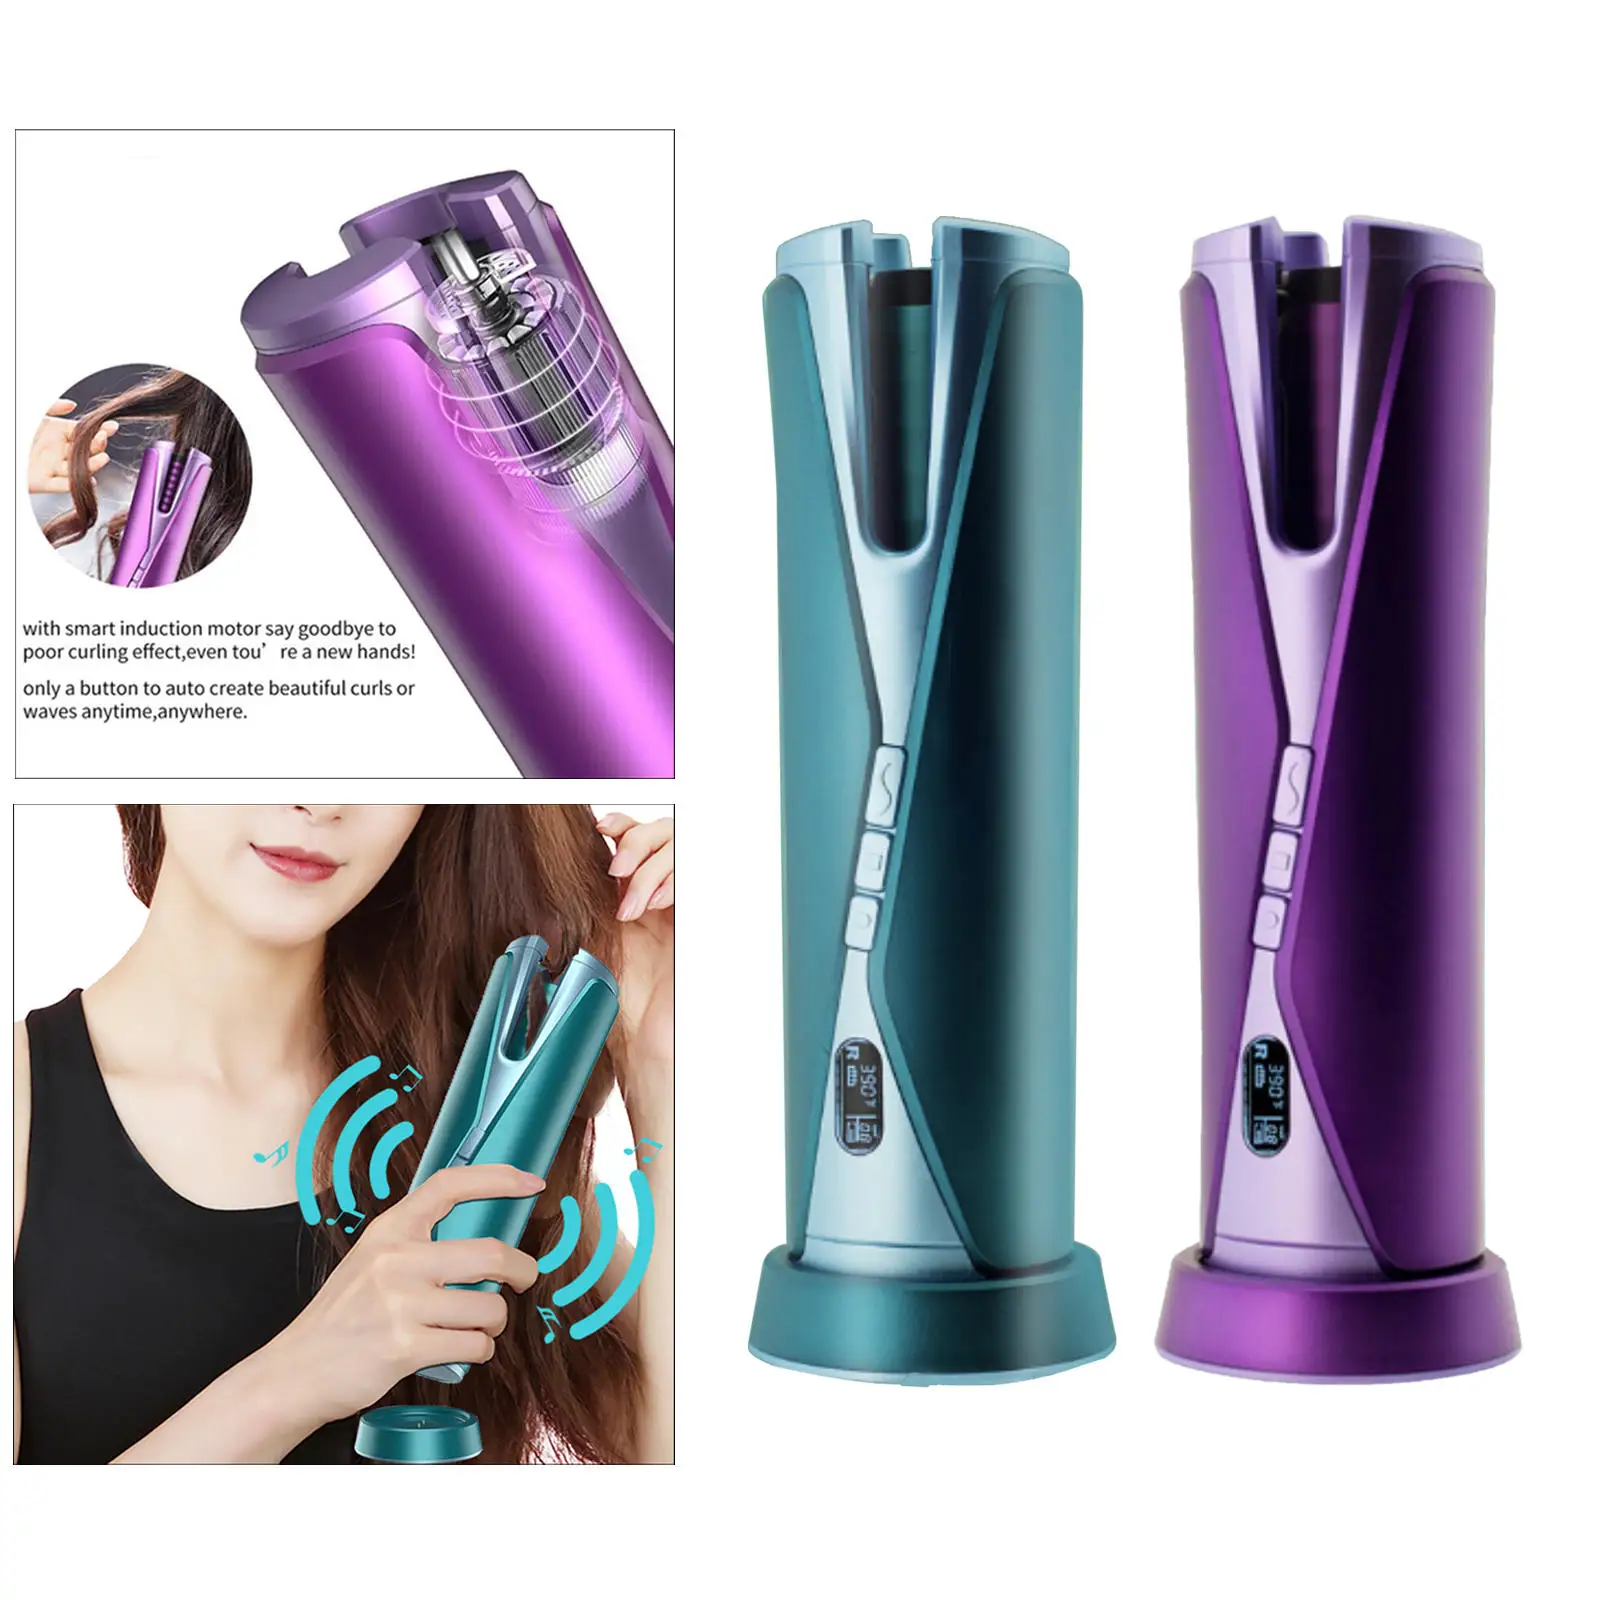 Portable Auto Hair Rollers Curler with LCD Display Cordless Music Curling Tongs Curling Iron for Hair Styling Travel, Home